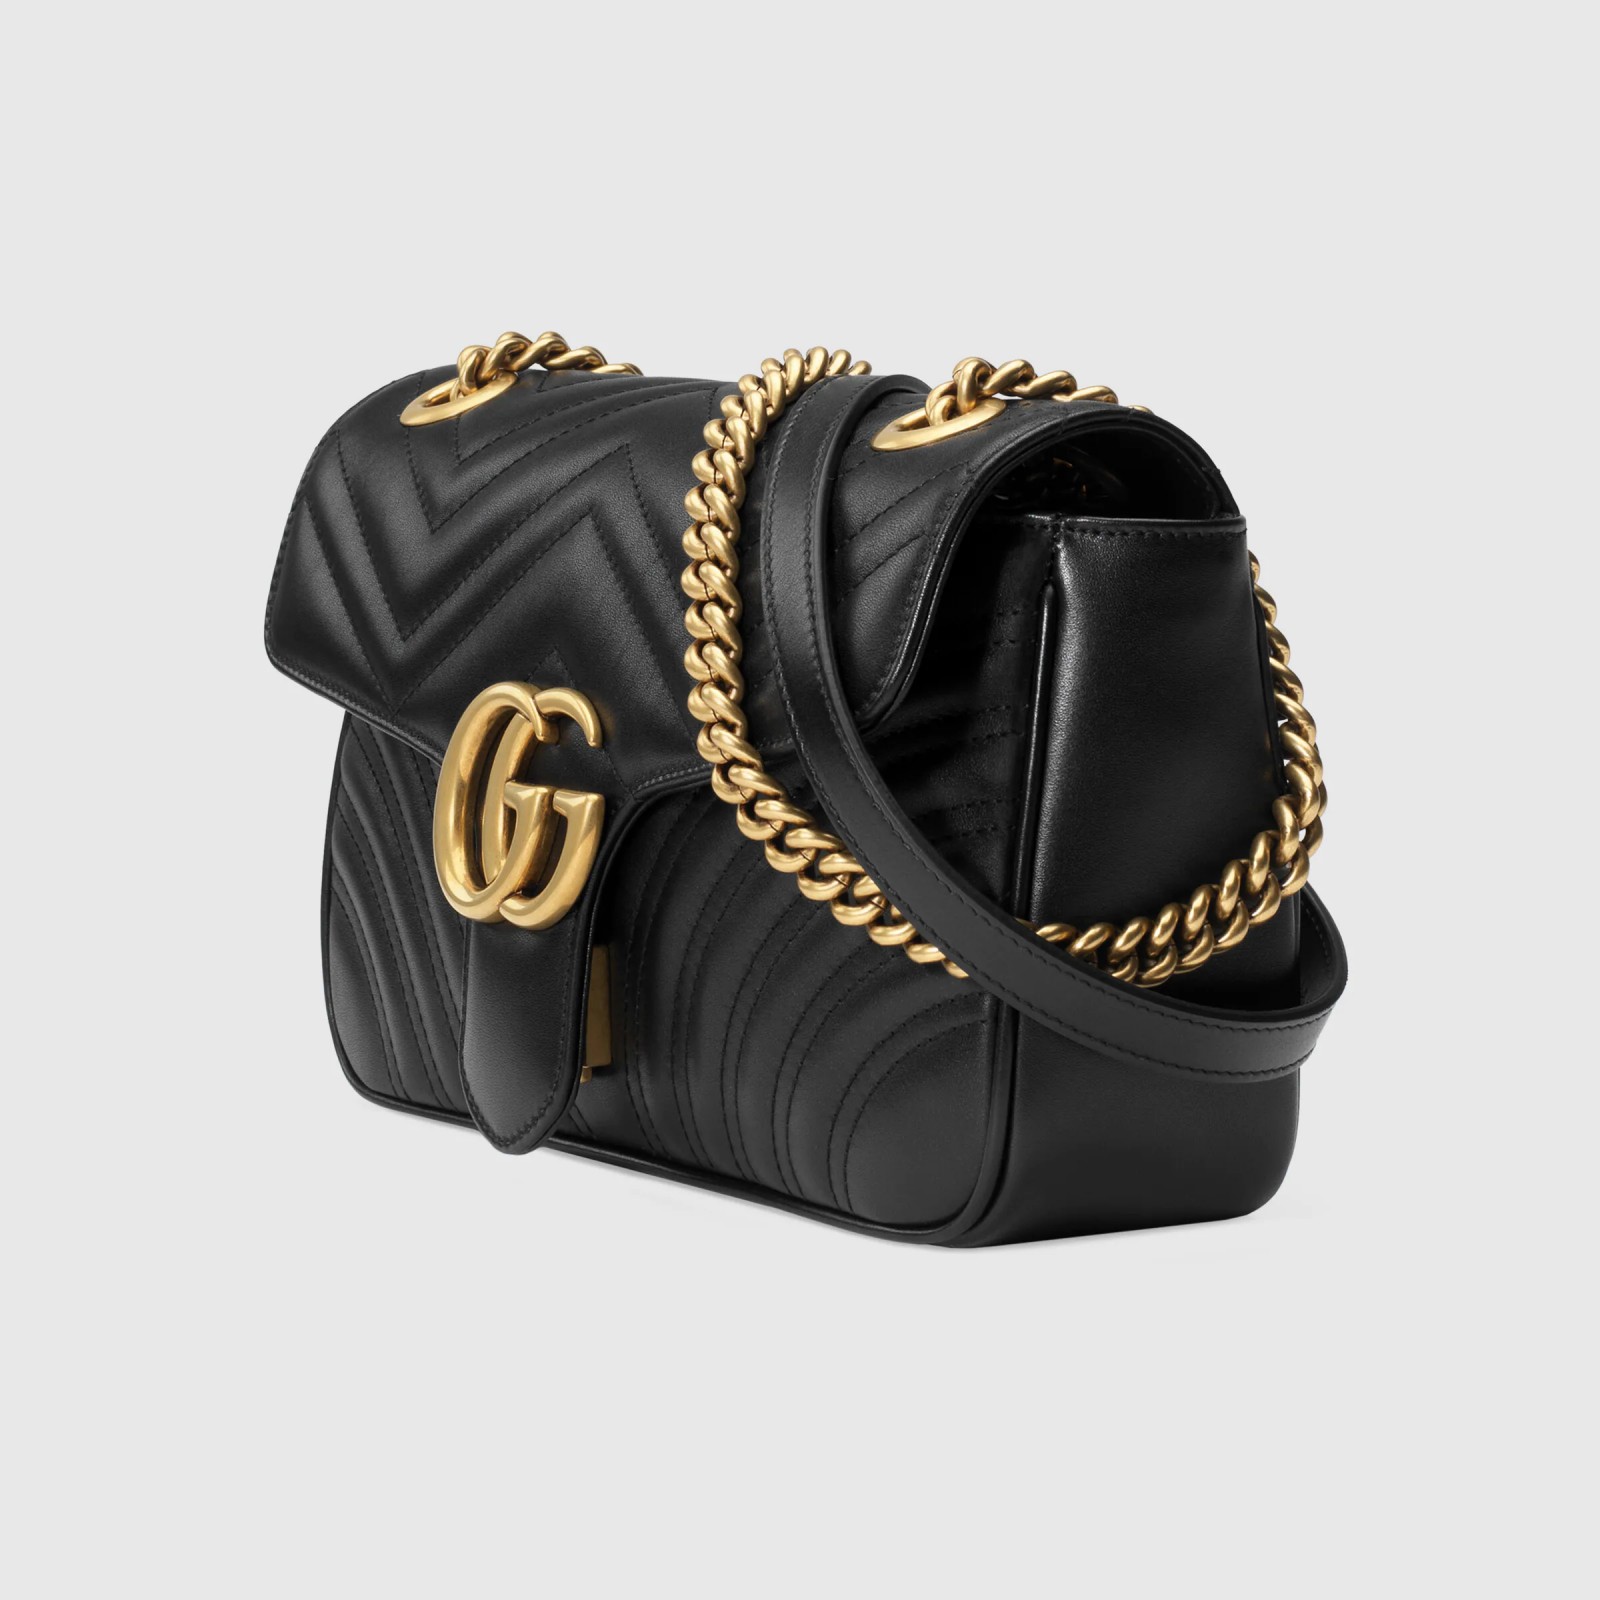 GG MARMONT SMALL SHOULDER BAG 